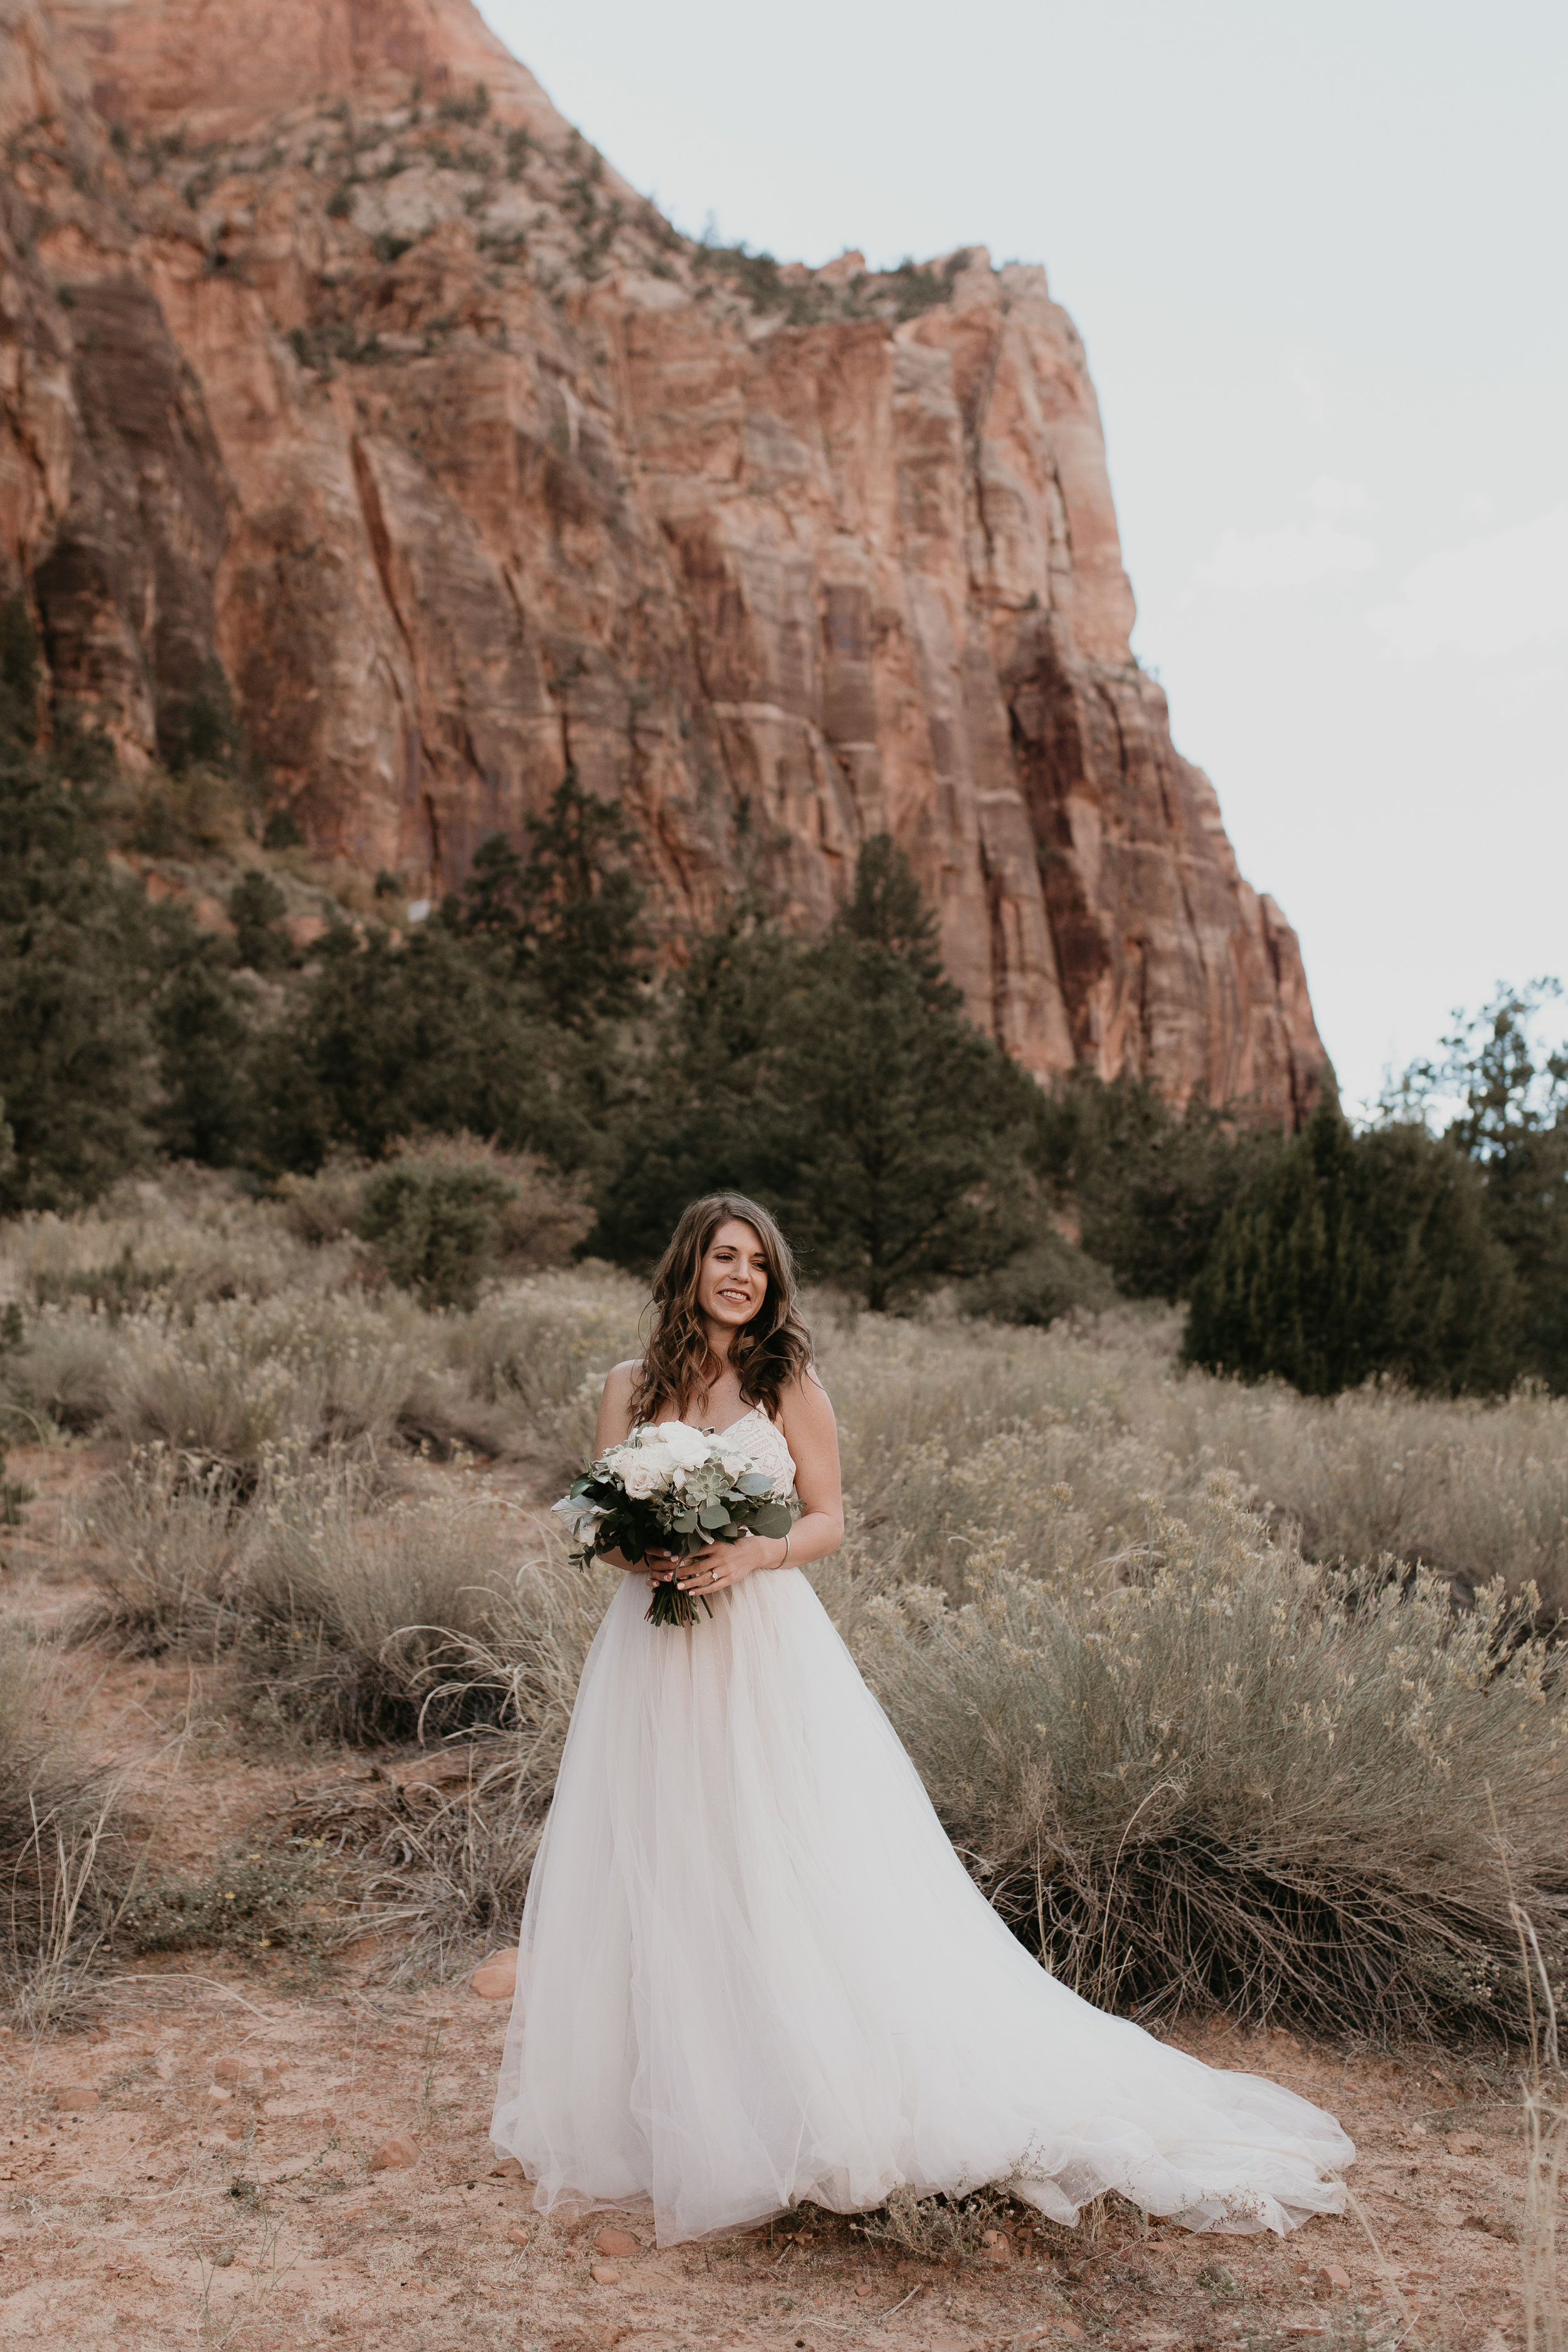 nicole-daacke-photography-zion-national-park-elopement-photographer-canyon-overlook-trail-elope-hiking-adventure-wedding-photos-fall-utah-red-rock-canyon-stgeorge-eloping-photographer-15.jpg